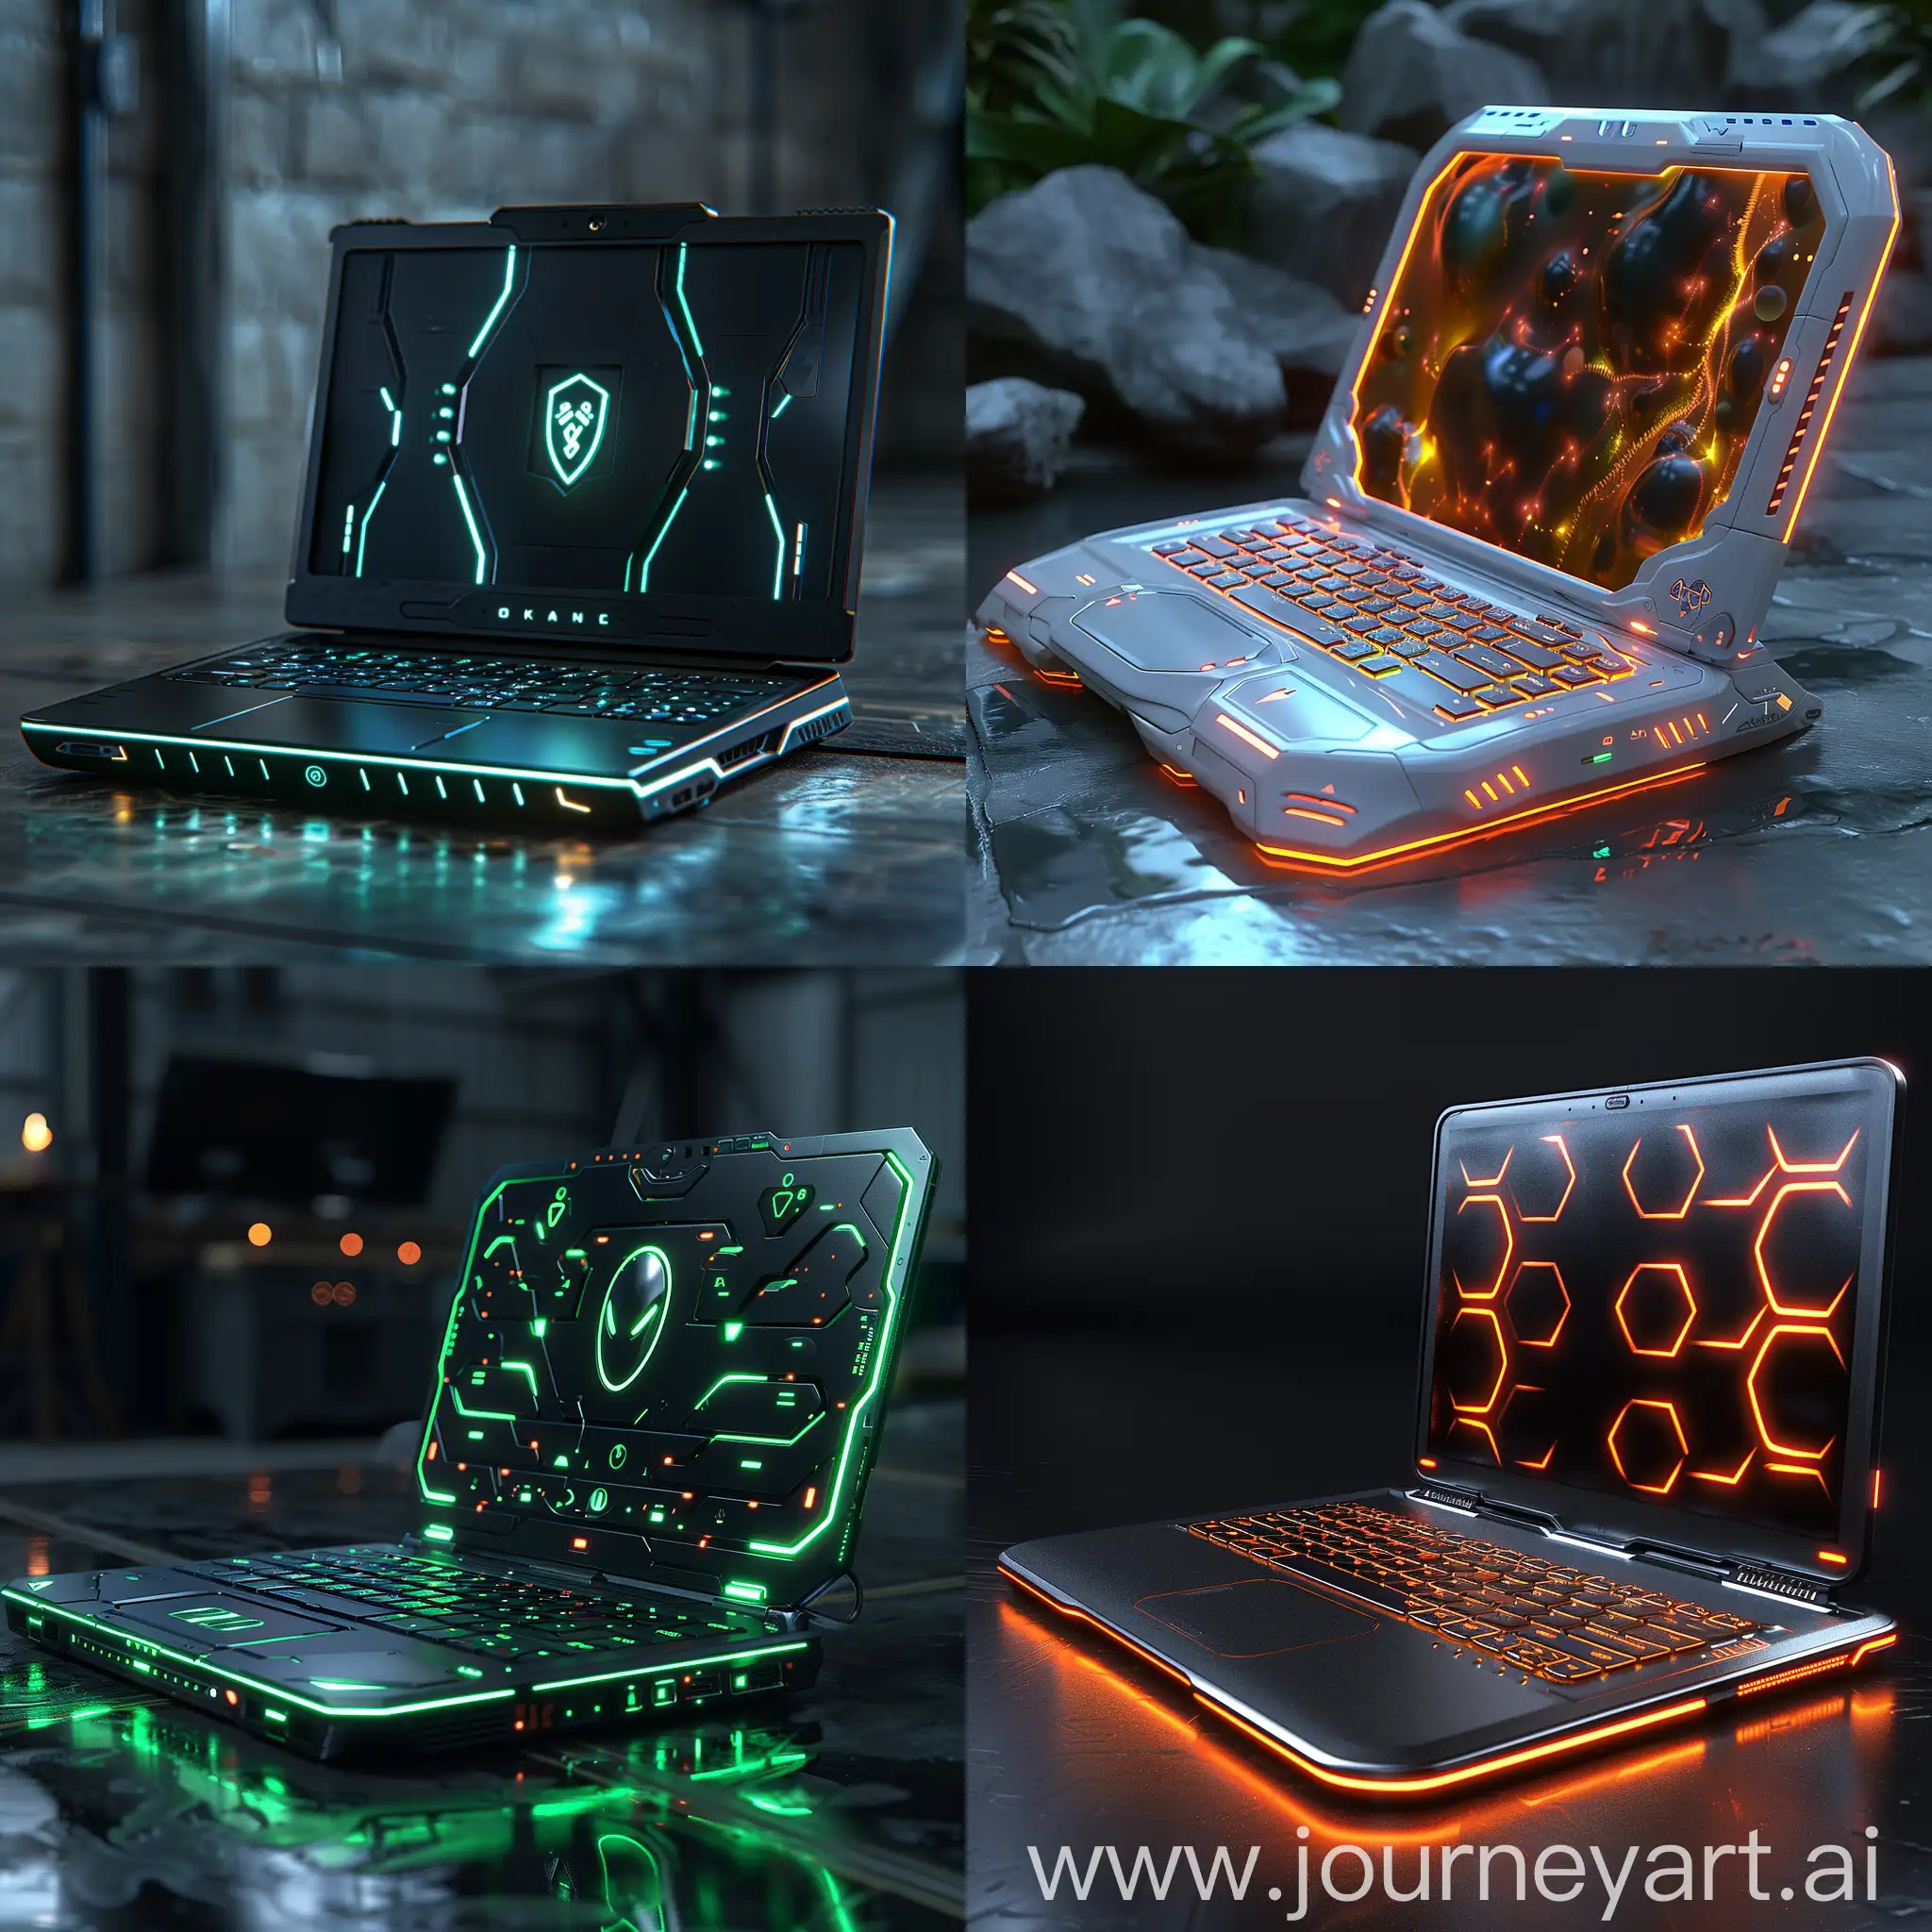 Futuristic-EcoFriendly-Laptop-with-HighTech-Style-and-Energy-Efficiency